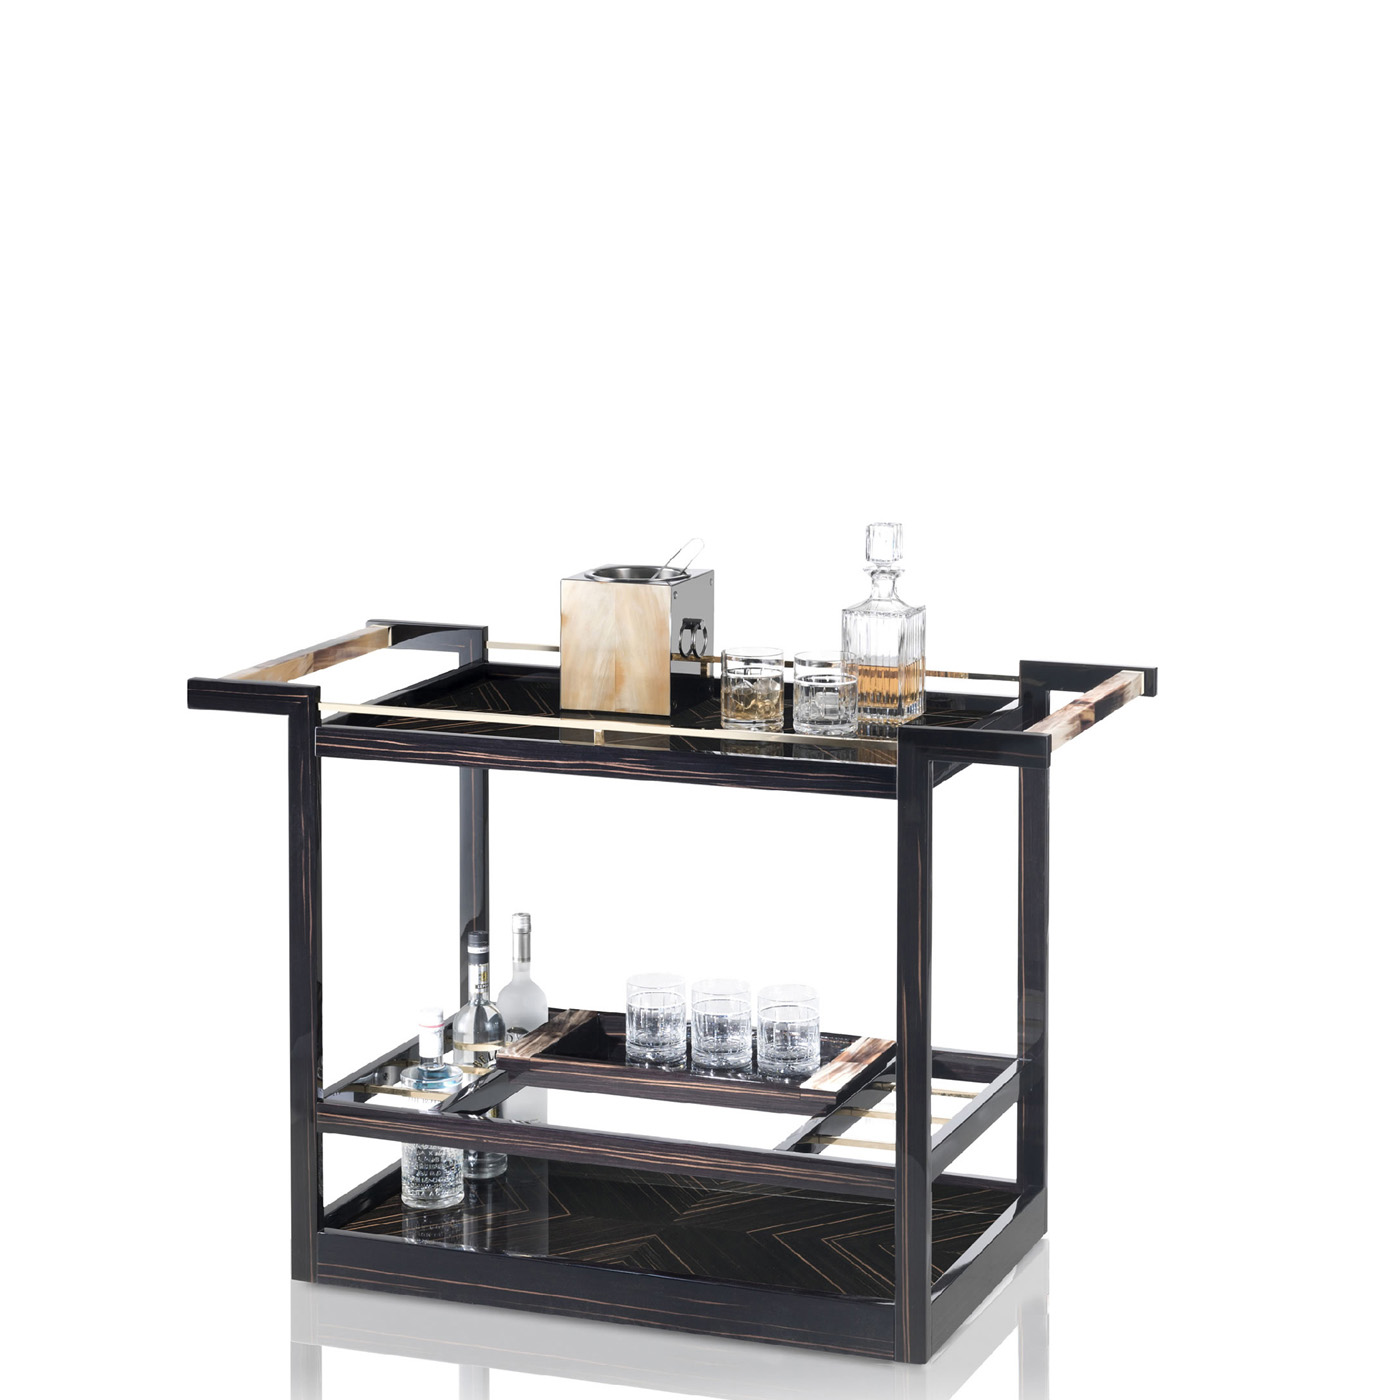 Trolleys and butlers serving tables - Elia trolley in glossy ebony and horn - side - Arcahorn